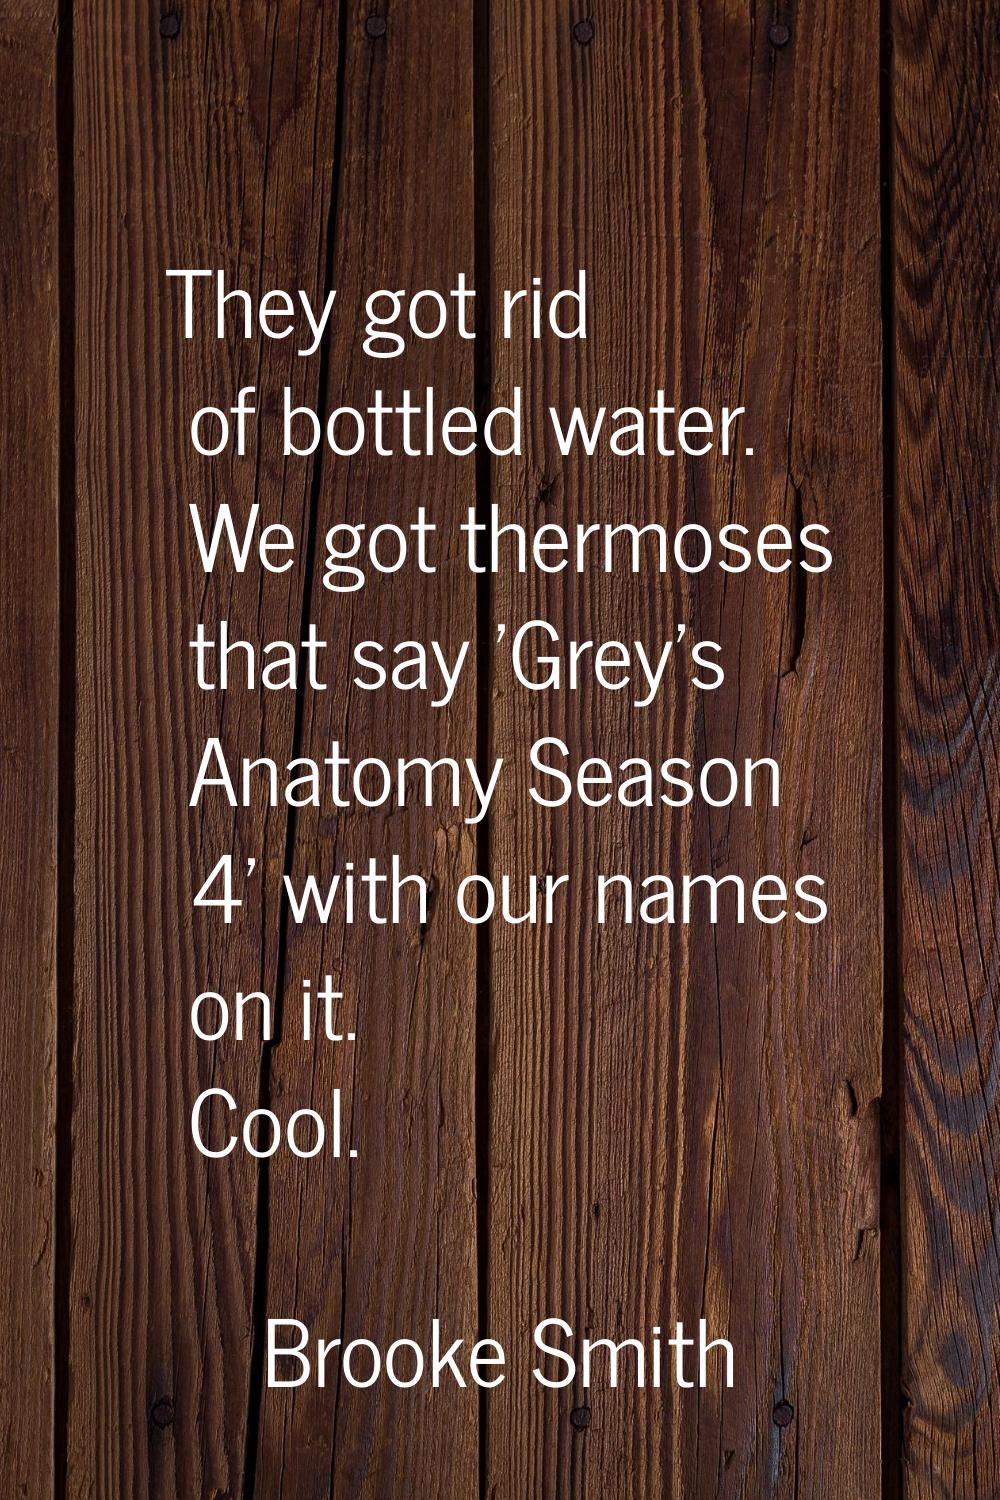 They got rid of bottled water. We got thermoses that say 'Grey's Anatomy Season 4' with our names o